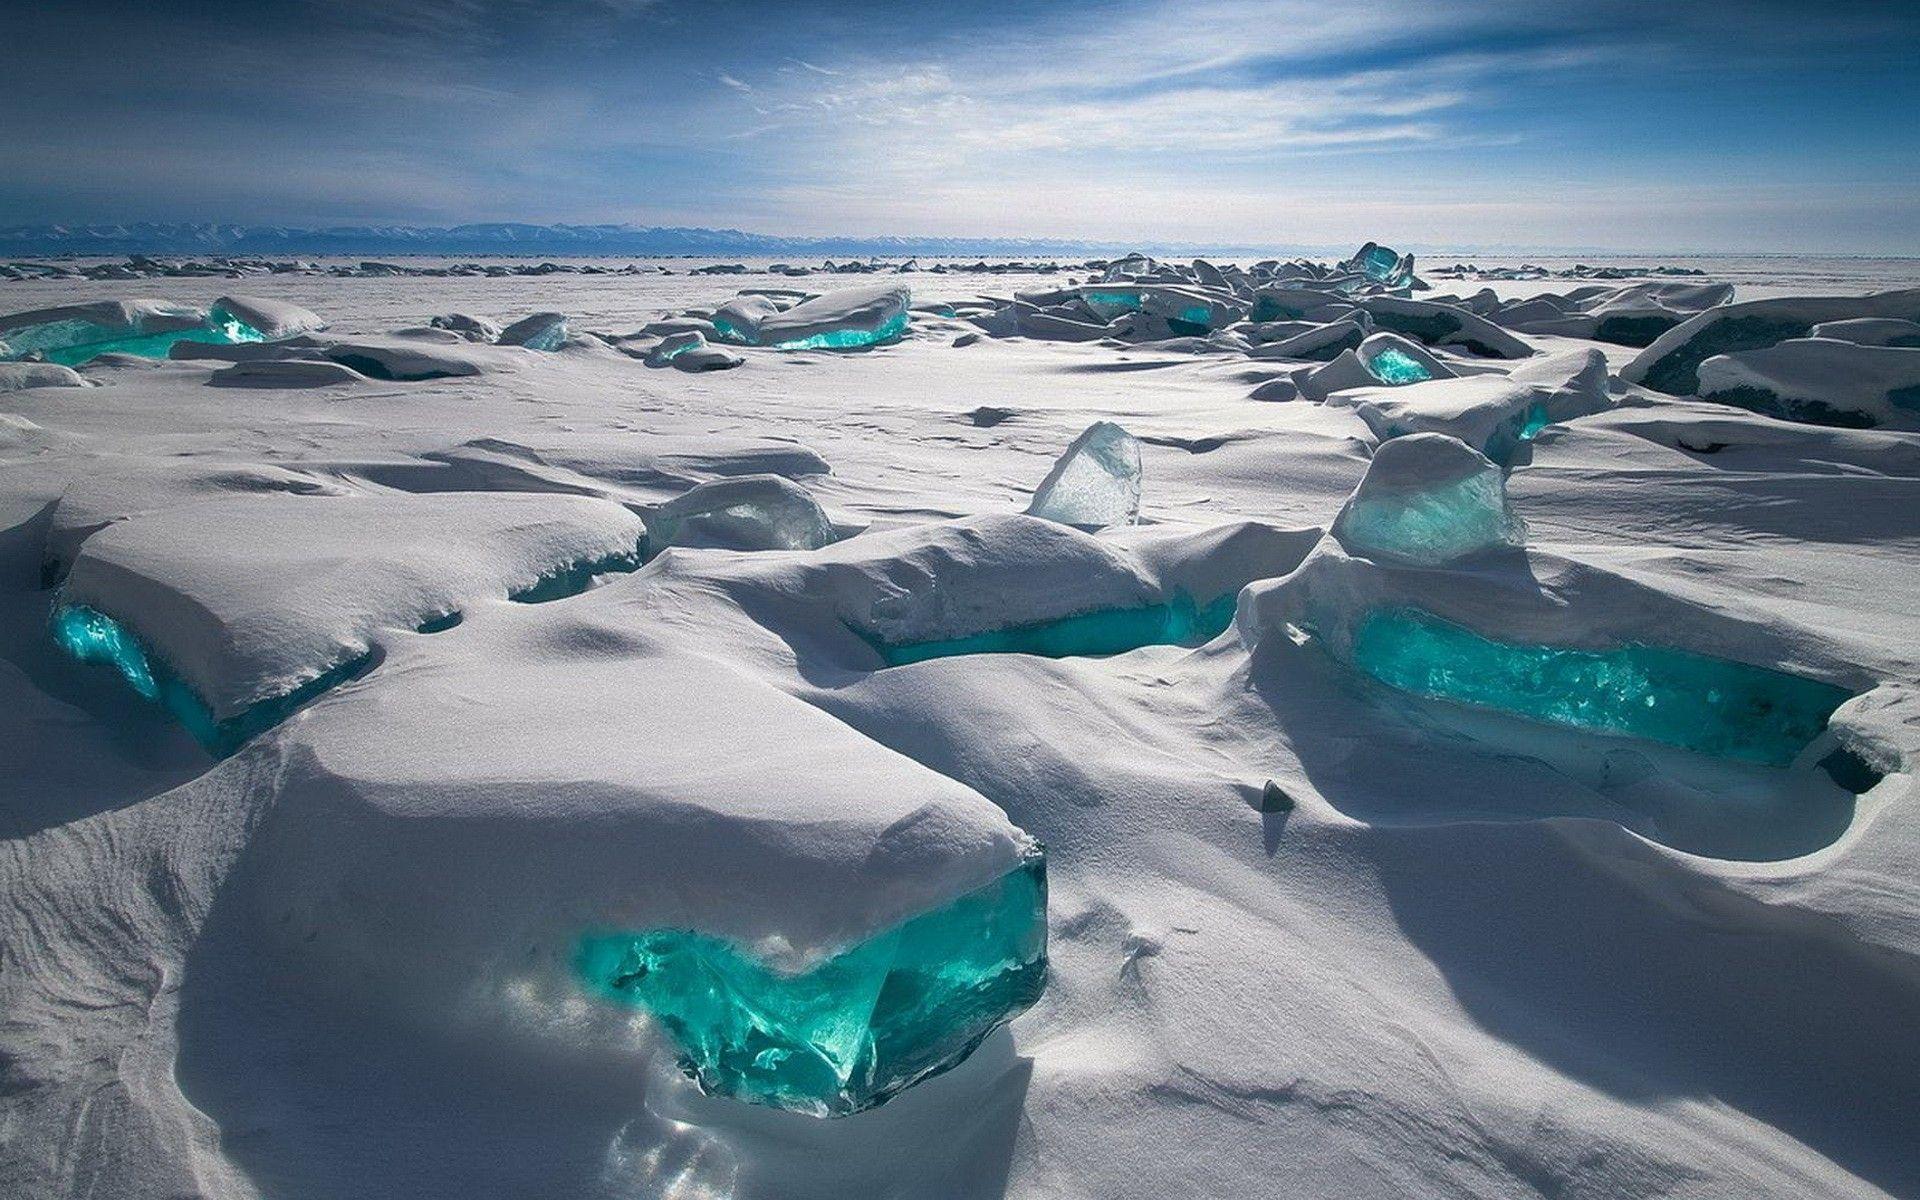 White snow field with large strikingly blue ice cubes pocking through. This is photo of Siberian environment of crispy clean air and land without toxins. Using products grown and manufactured in clean environments like that ensures their high quality and purity.